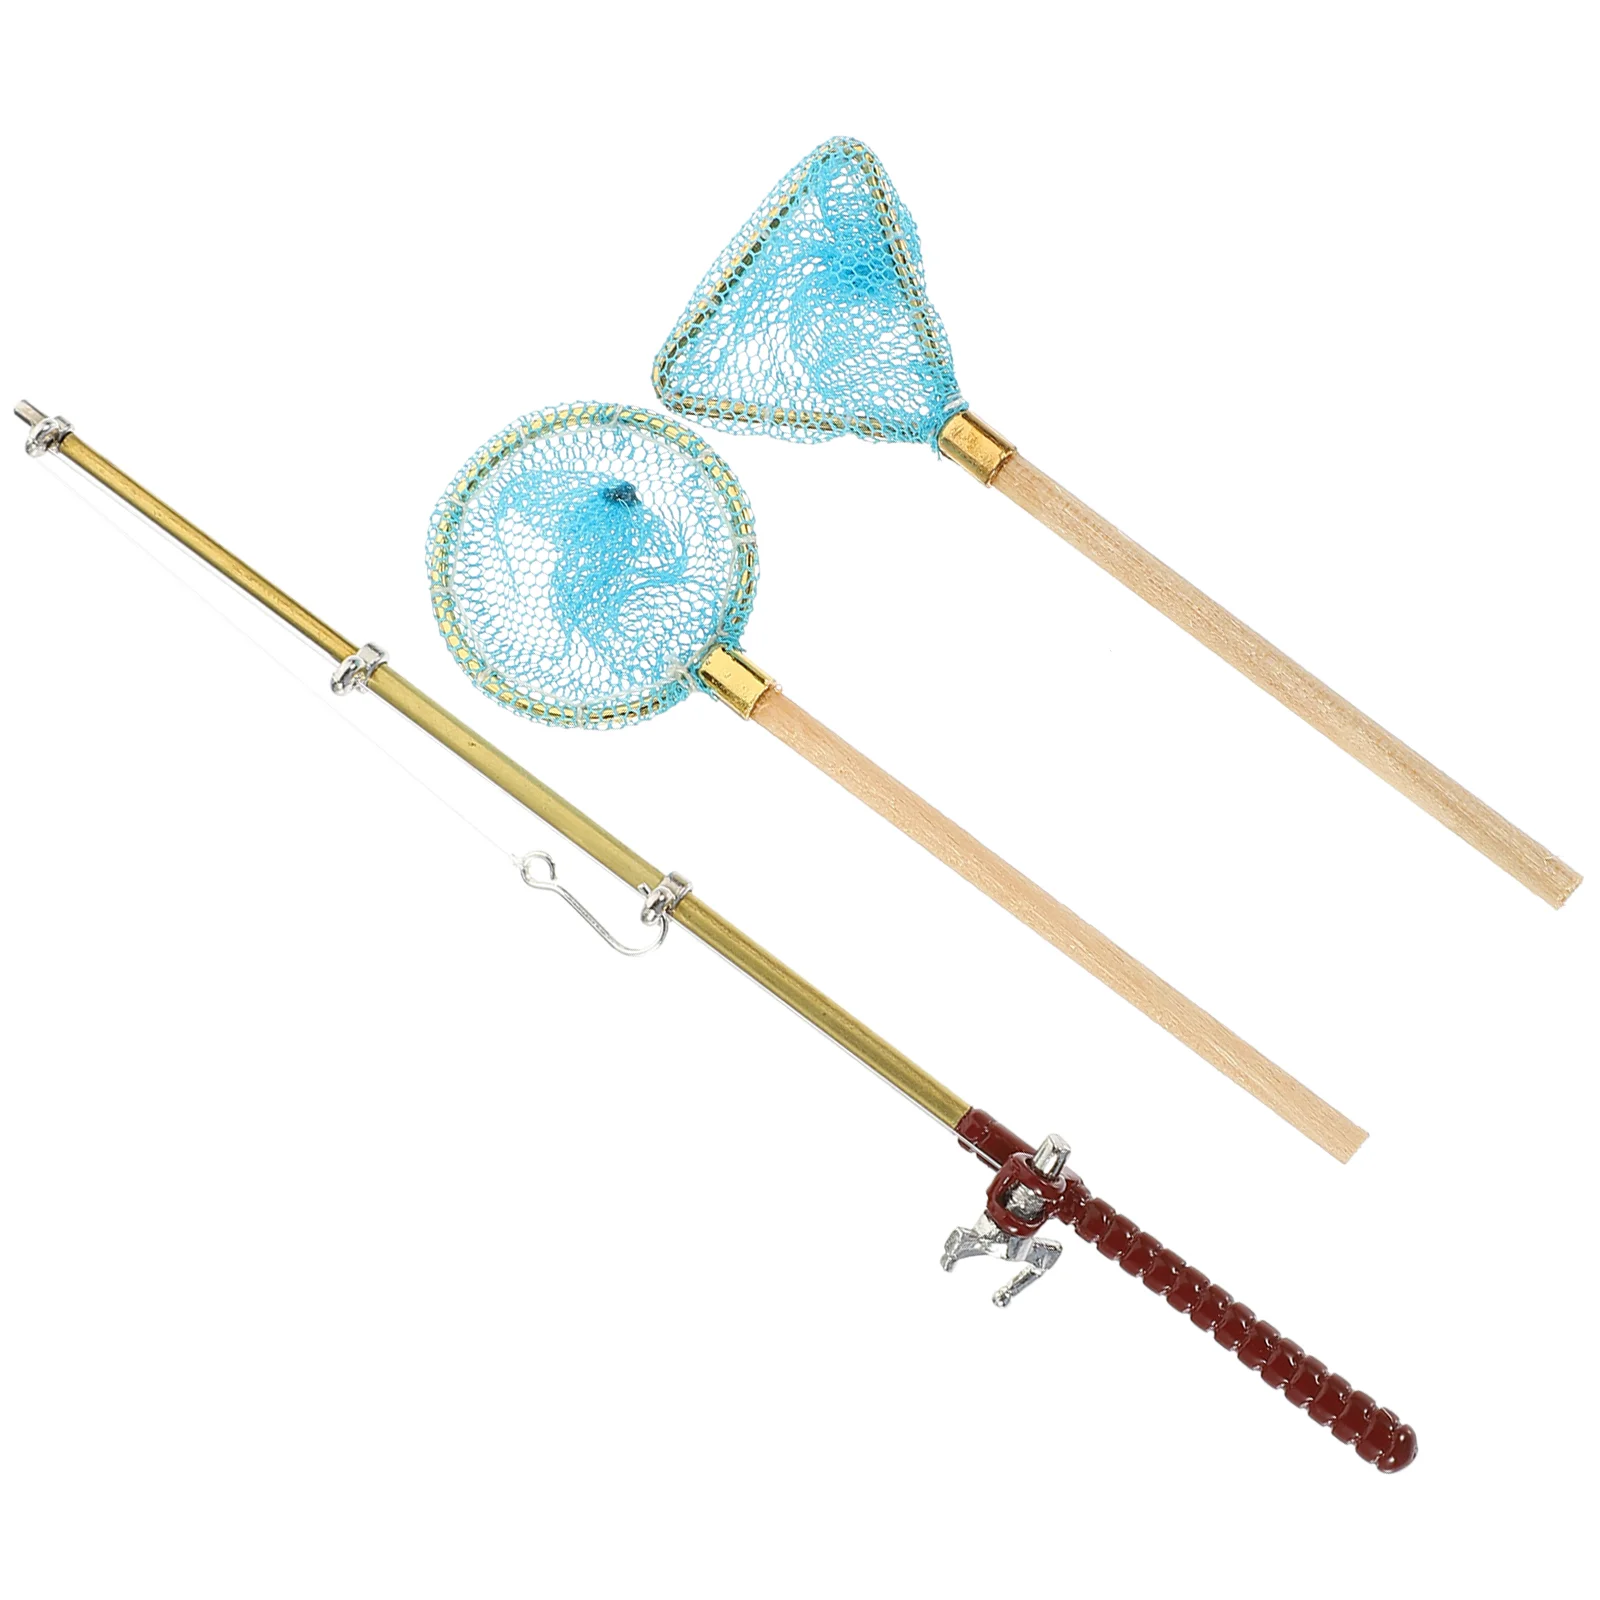 Mini Fishing Rod Toy Decorative Miniature Accessories for Dolls House Props Wood - £10.95 GBP